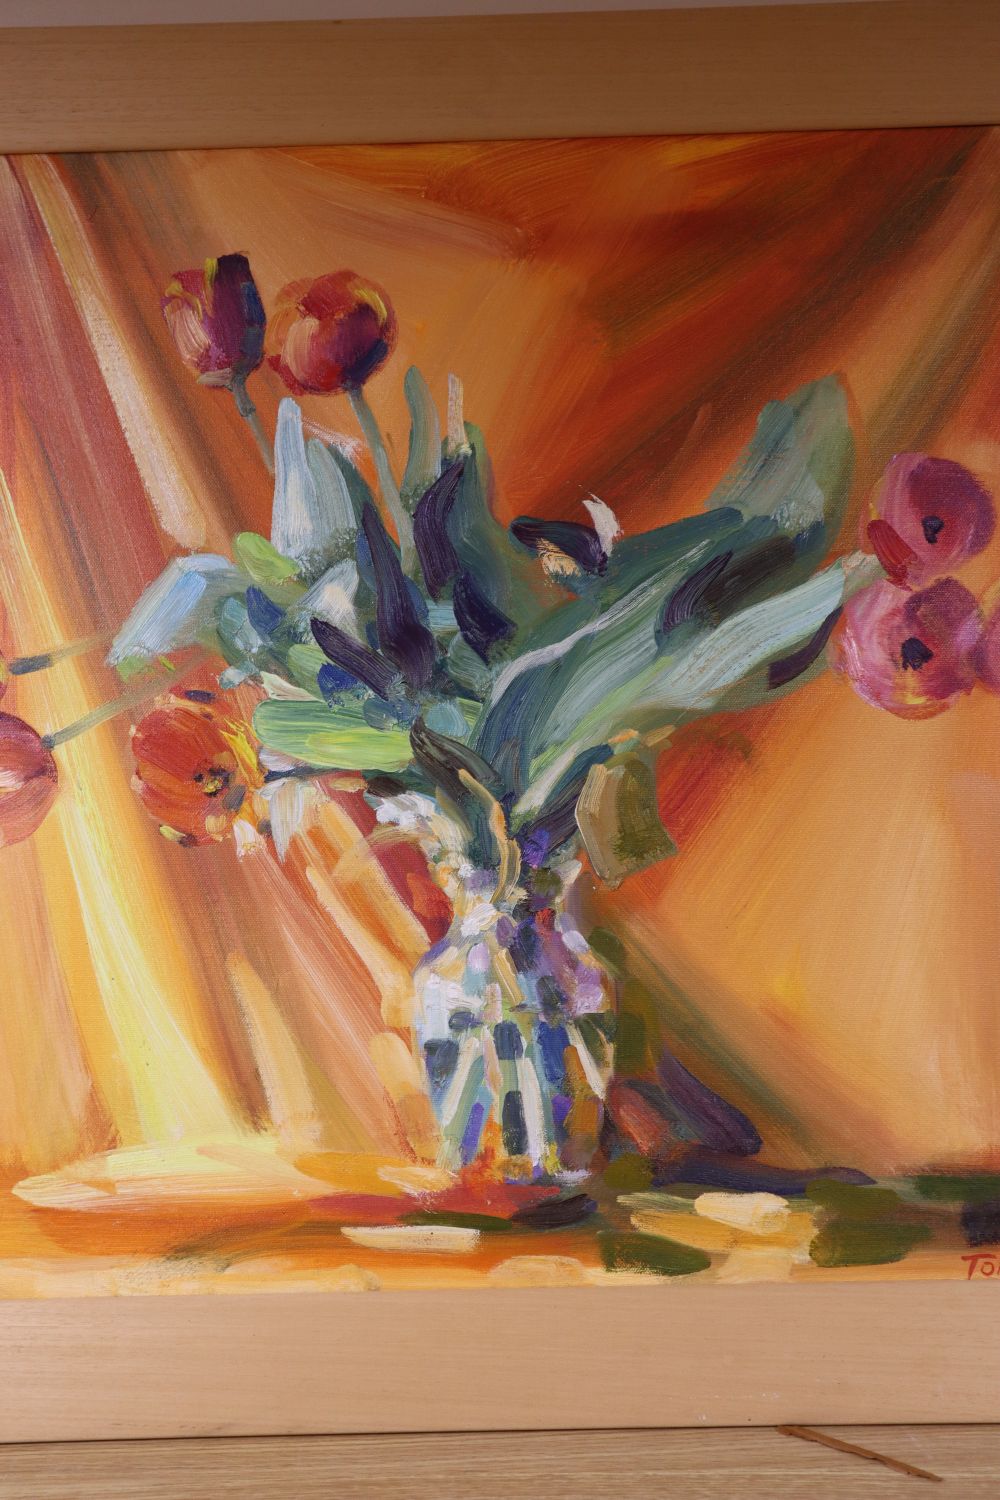 Tom Wise, oil on canvas, Still life of flowers in a glass vase, signed and dated 98, 60 x 60cm